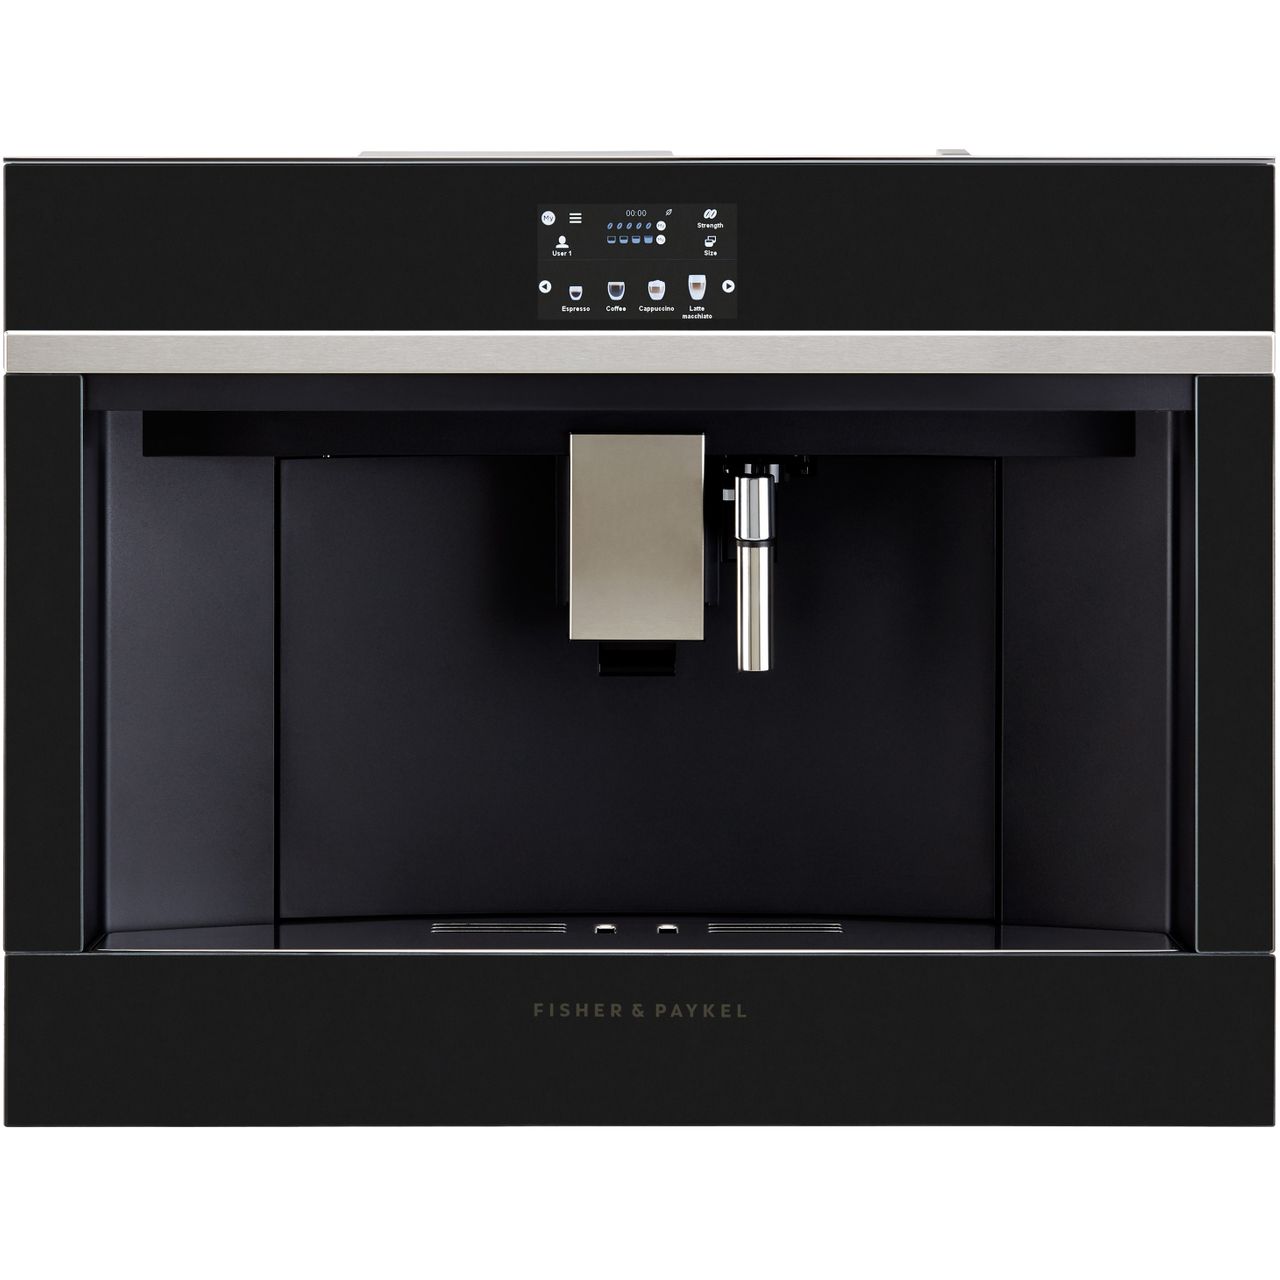 Fisher & Paykel EB60DSXB2 Built In Bean to Cup Coffee Machine Review